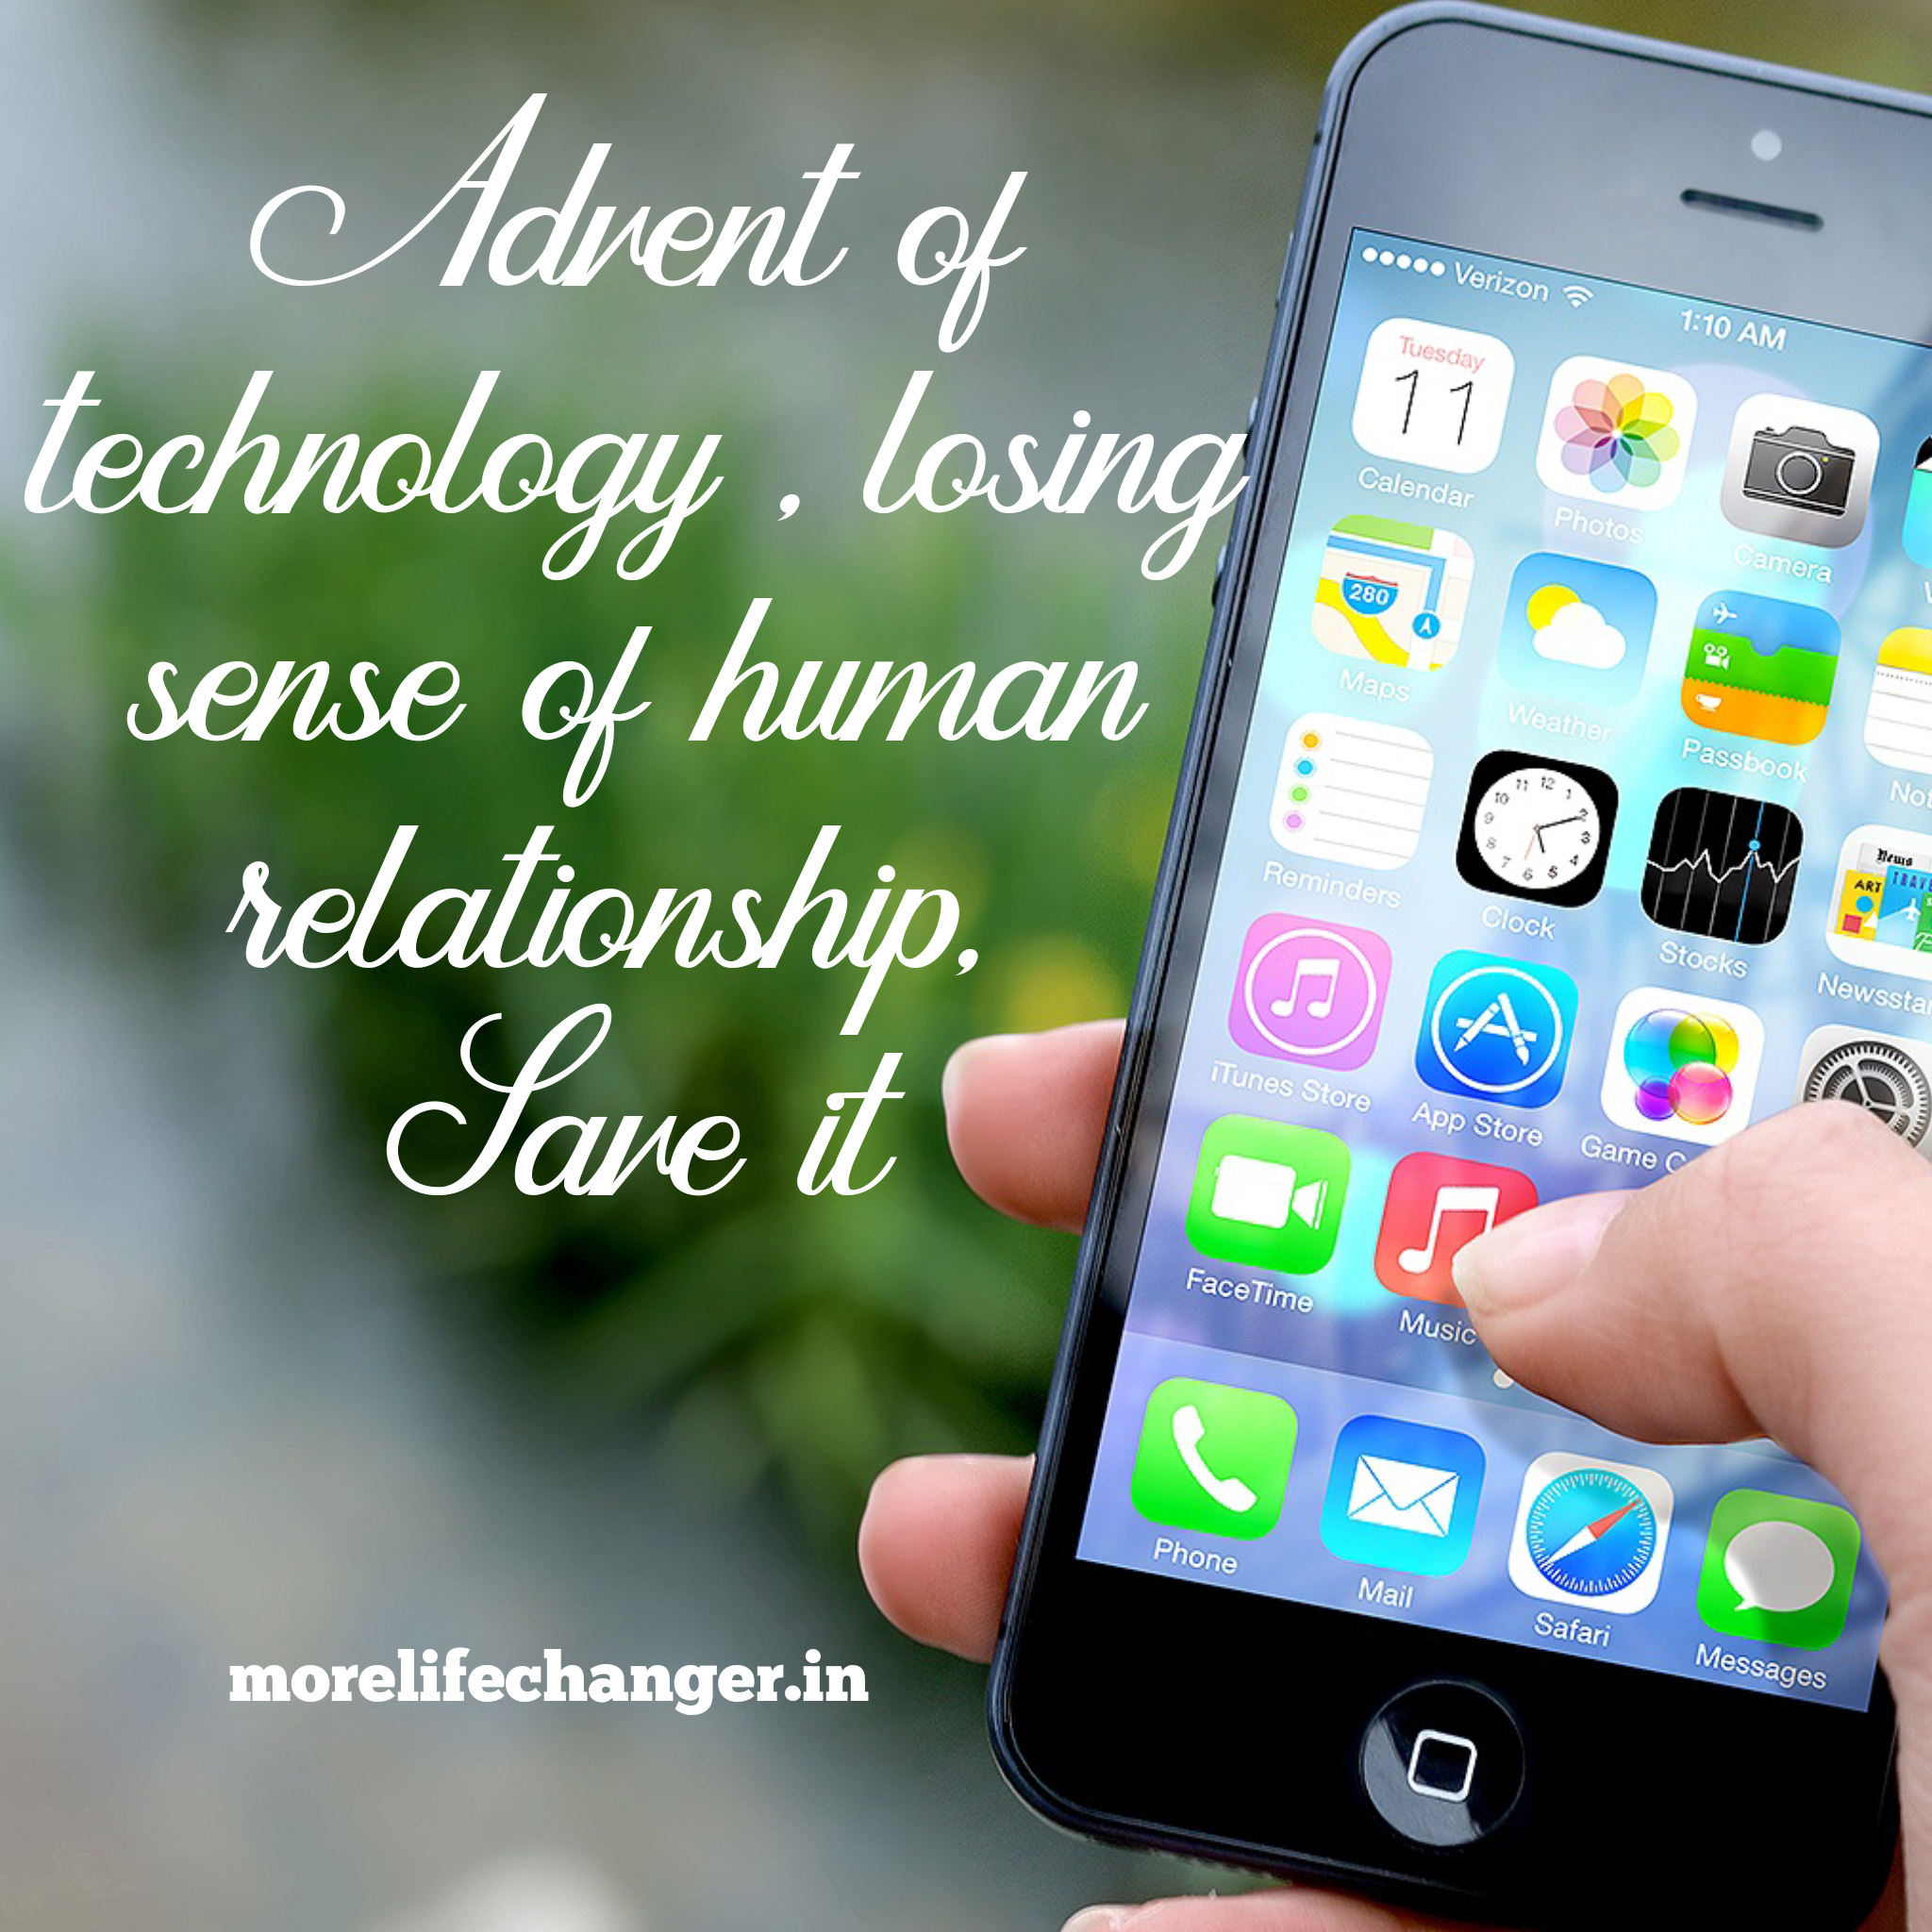 Advent of technology , losing sense of human relationship, save it